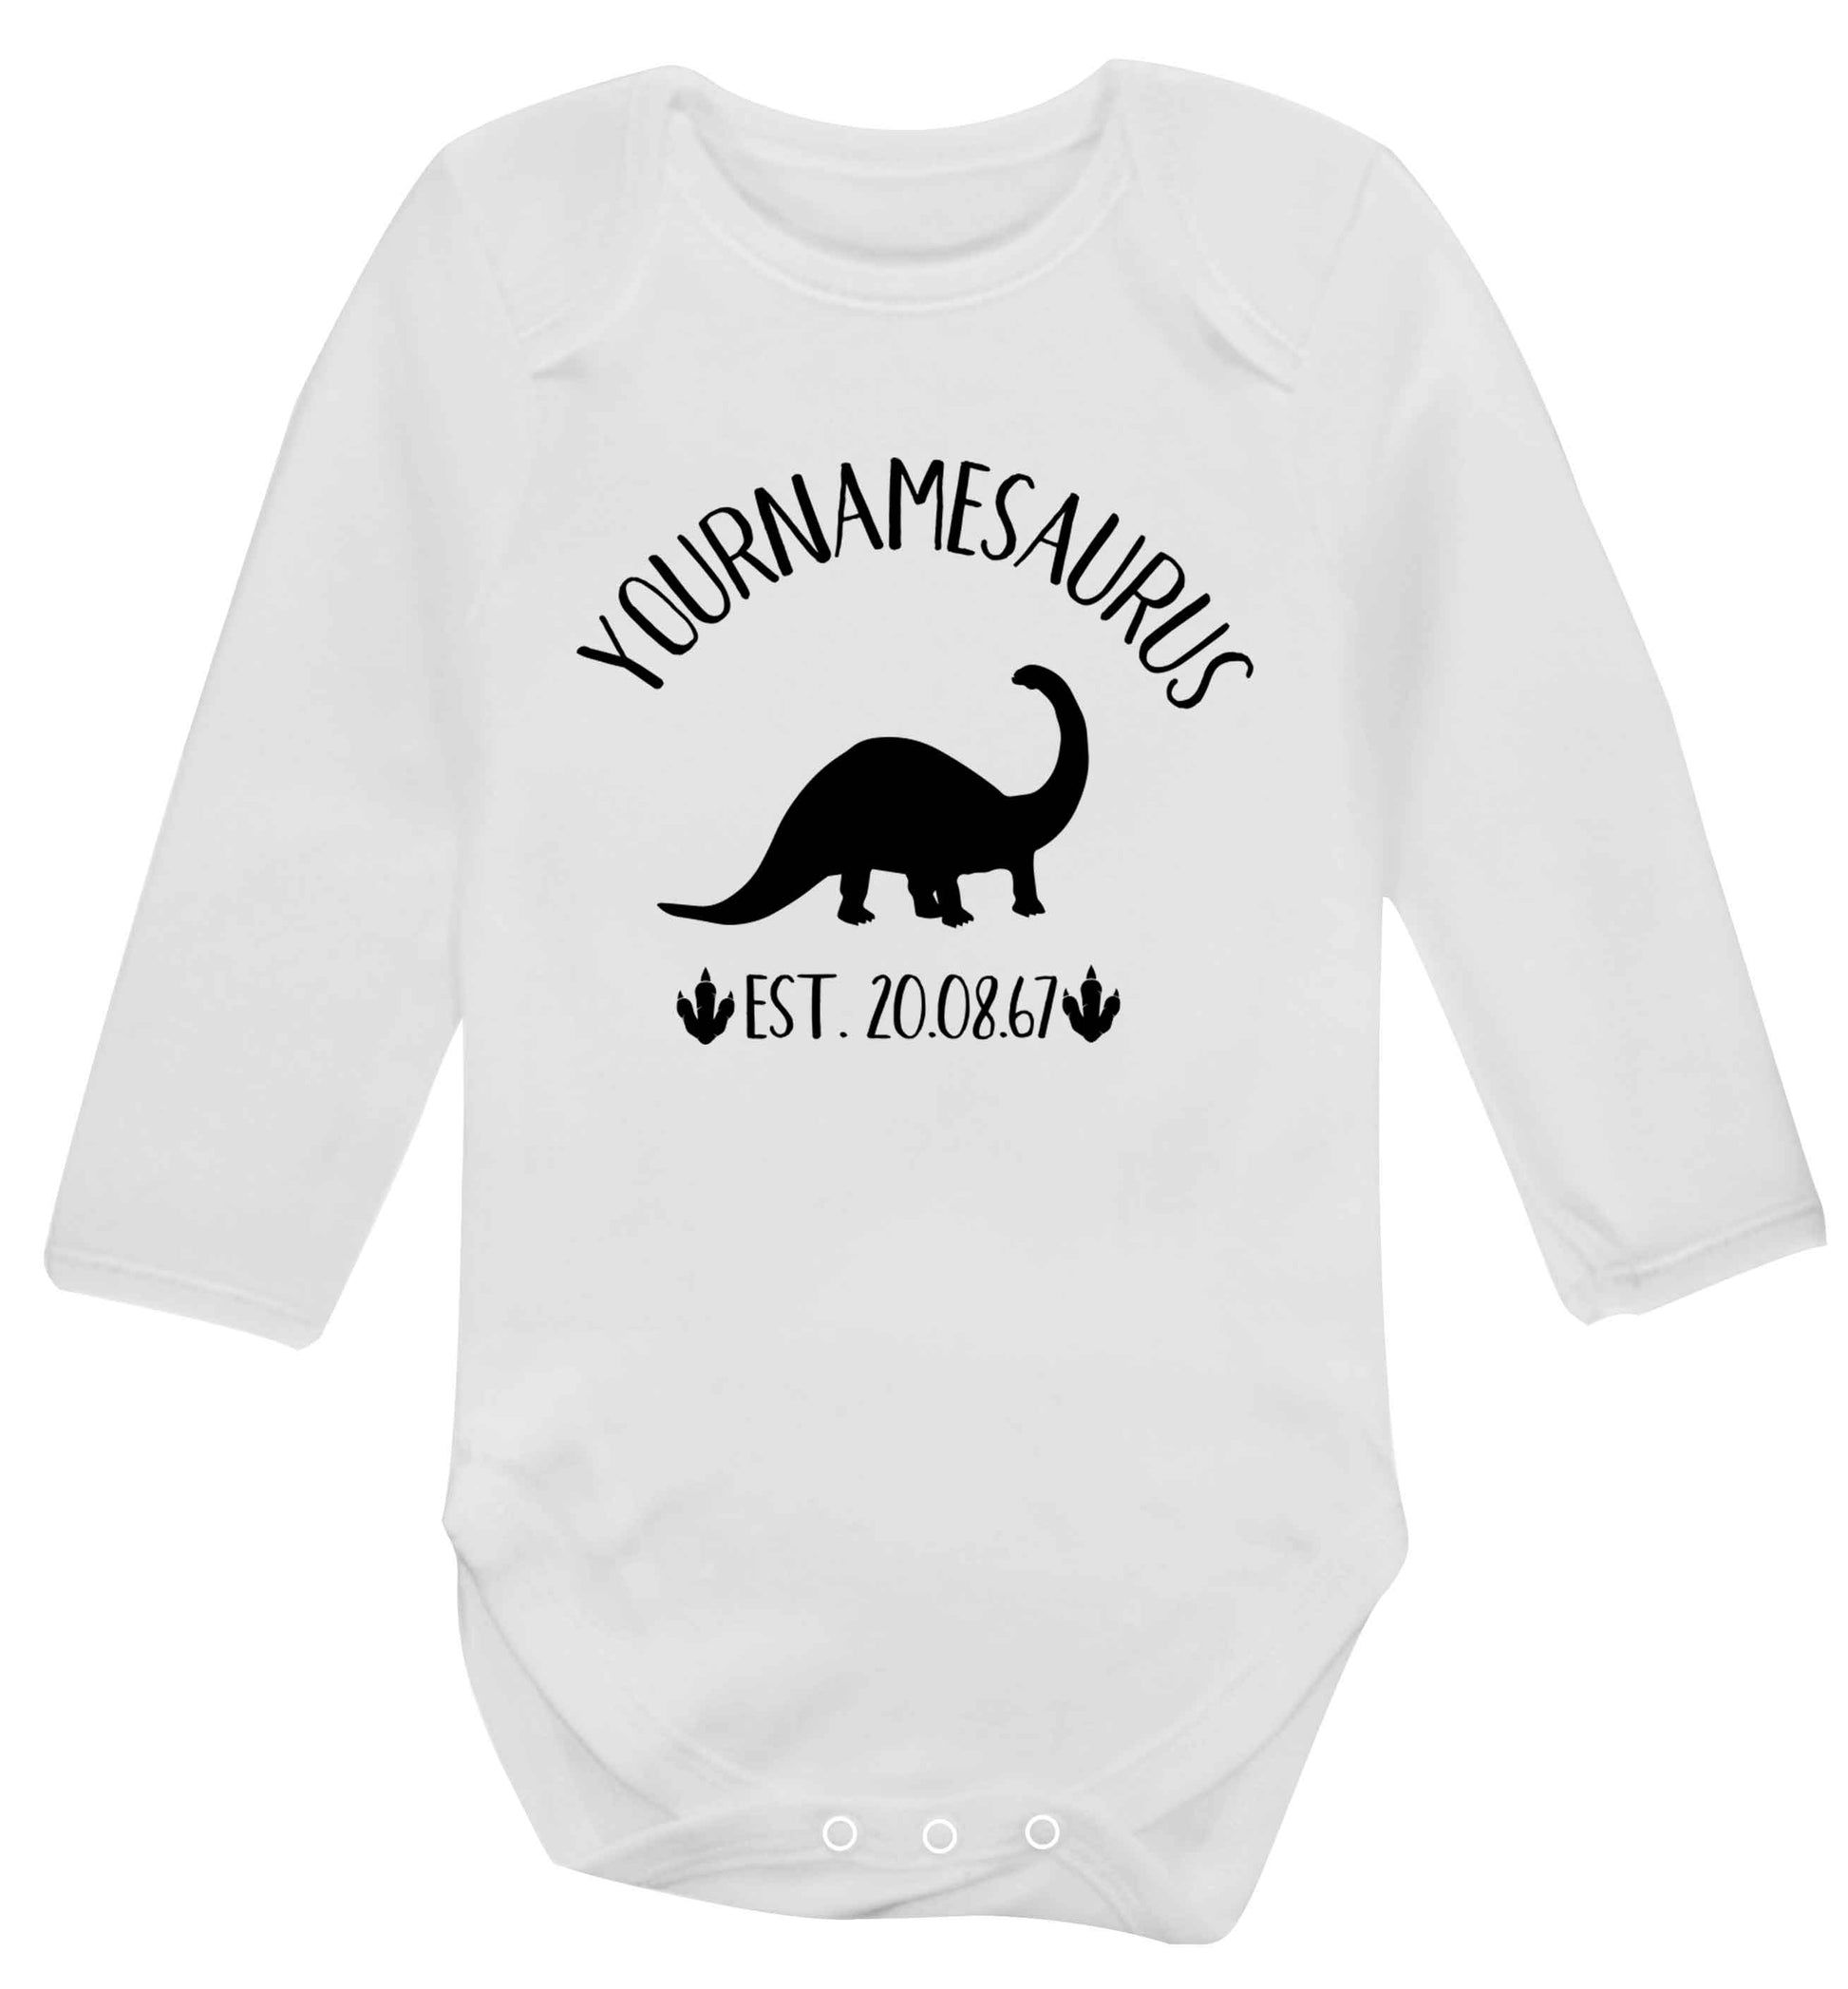 Personalised (your name) dinosaur birthday Baby Vest long sleeved white 6-12 months